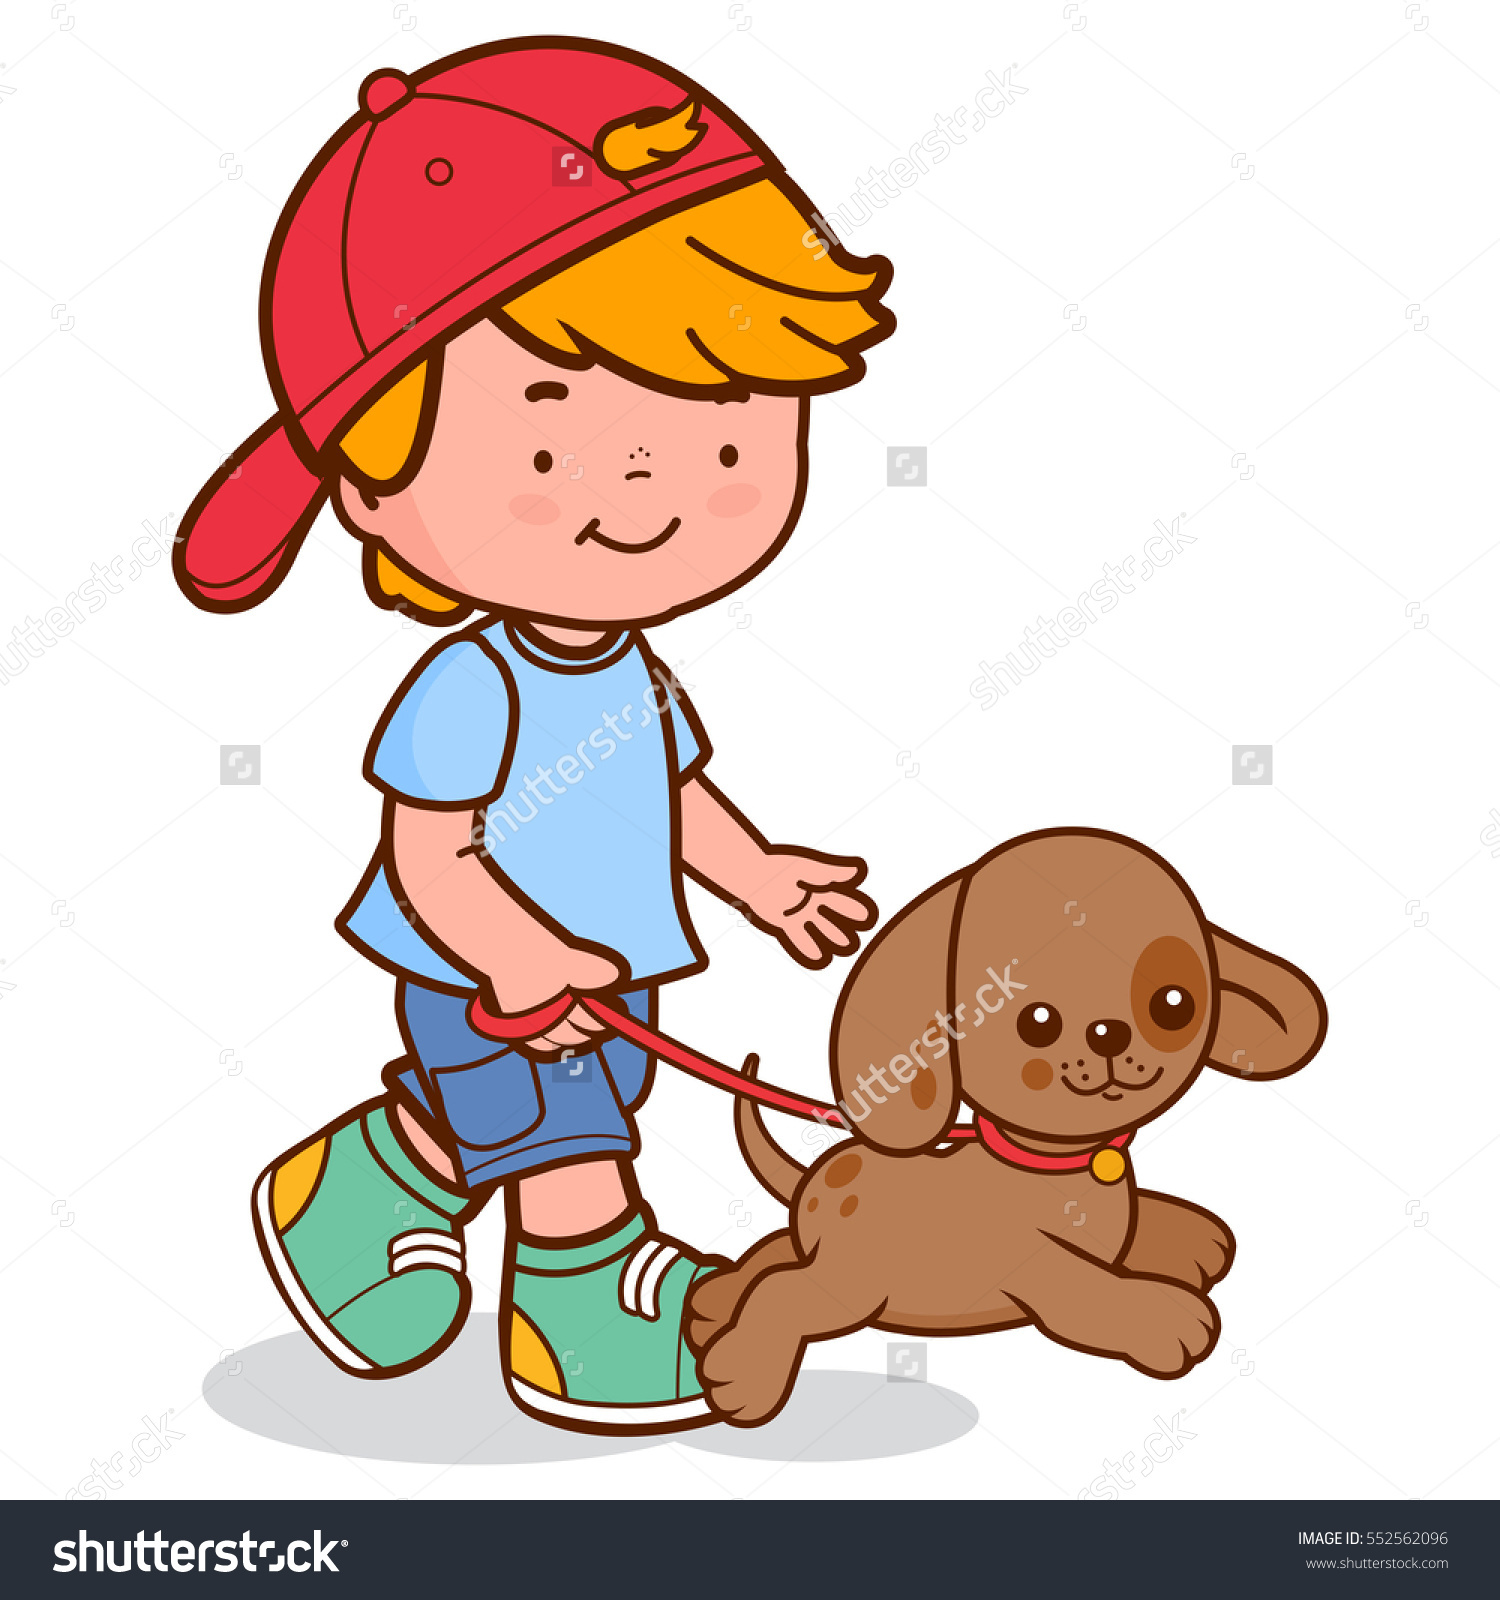 Showing post & media for Cartoon boy walking with dog.